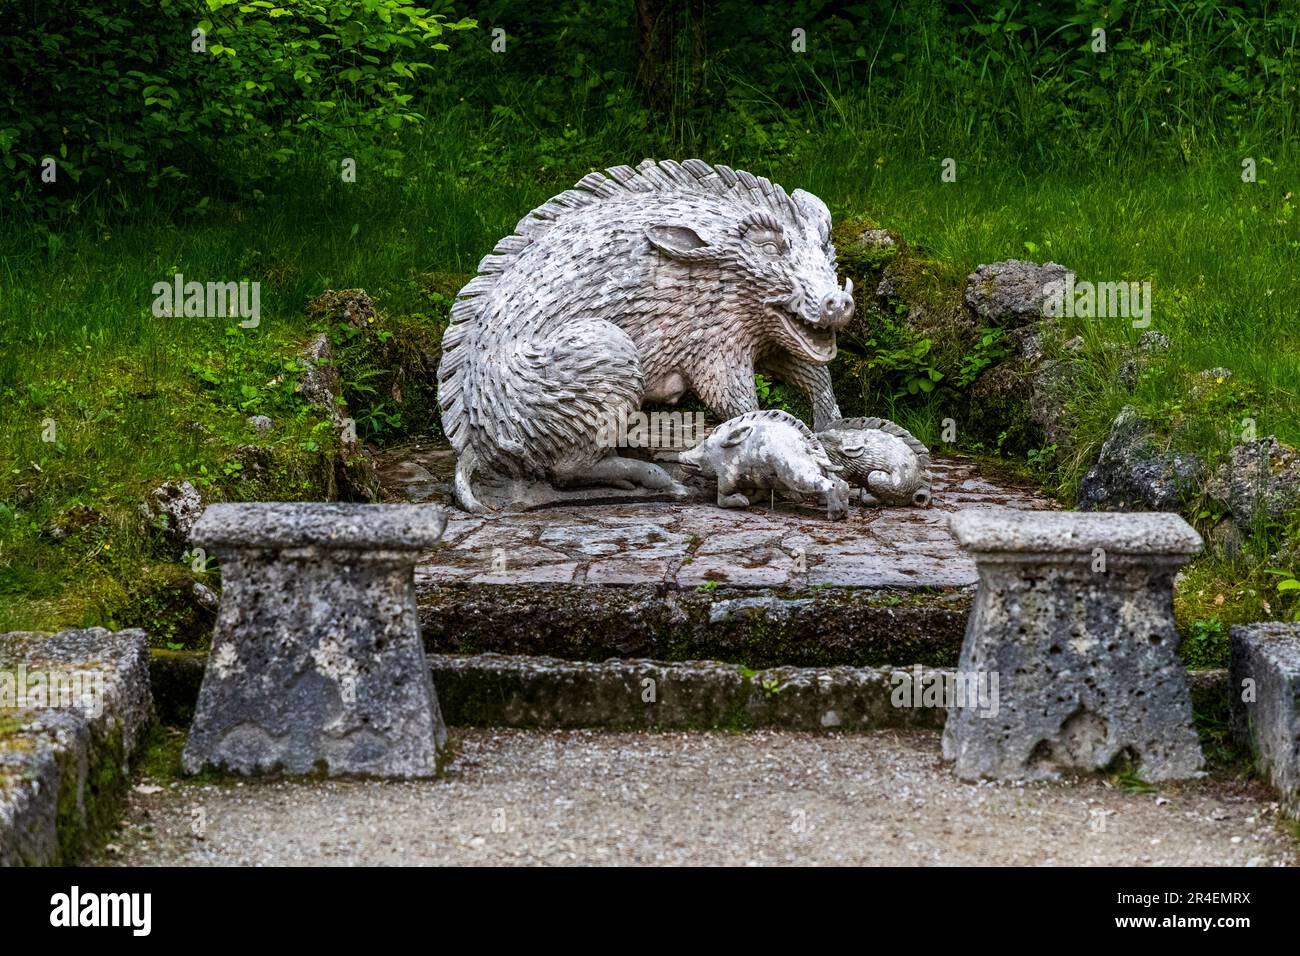 The wild boar niche of the fountains of Hellbrunn Palace in Salzburg, Austria Stock Photo